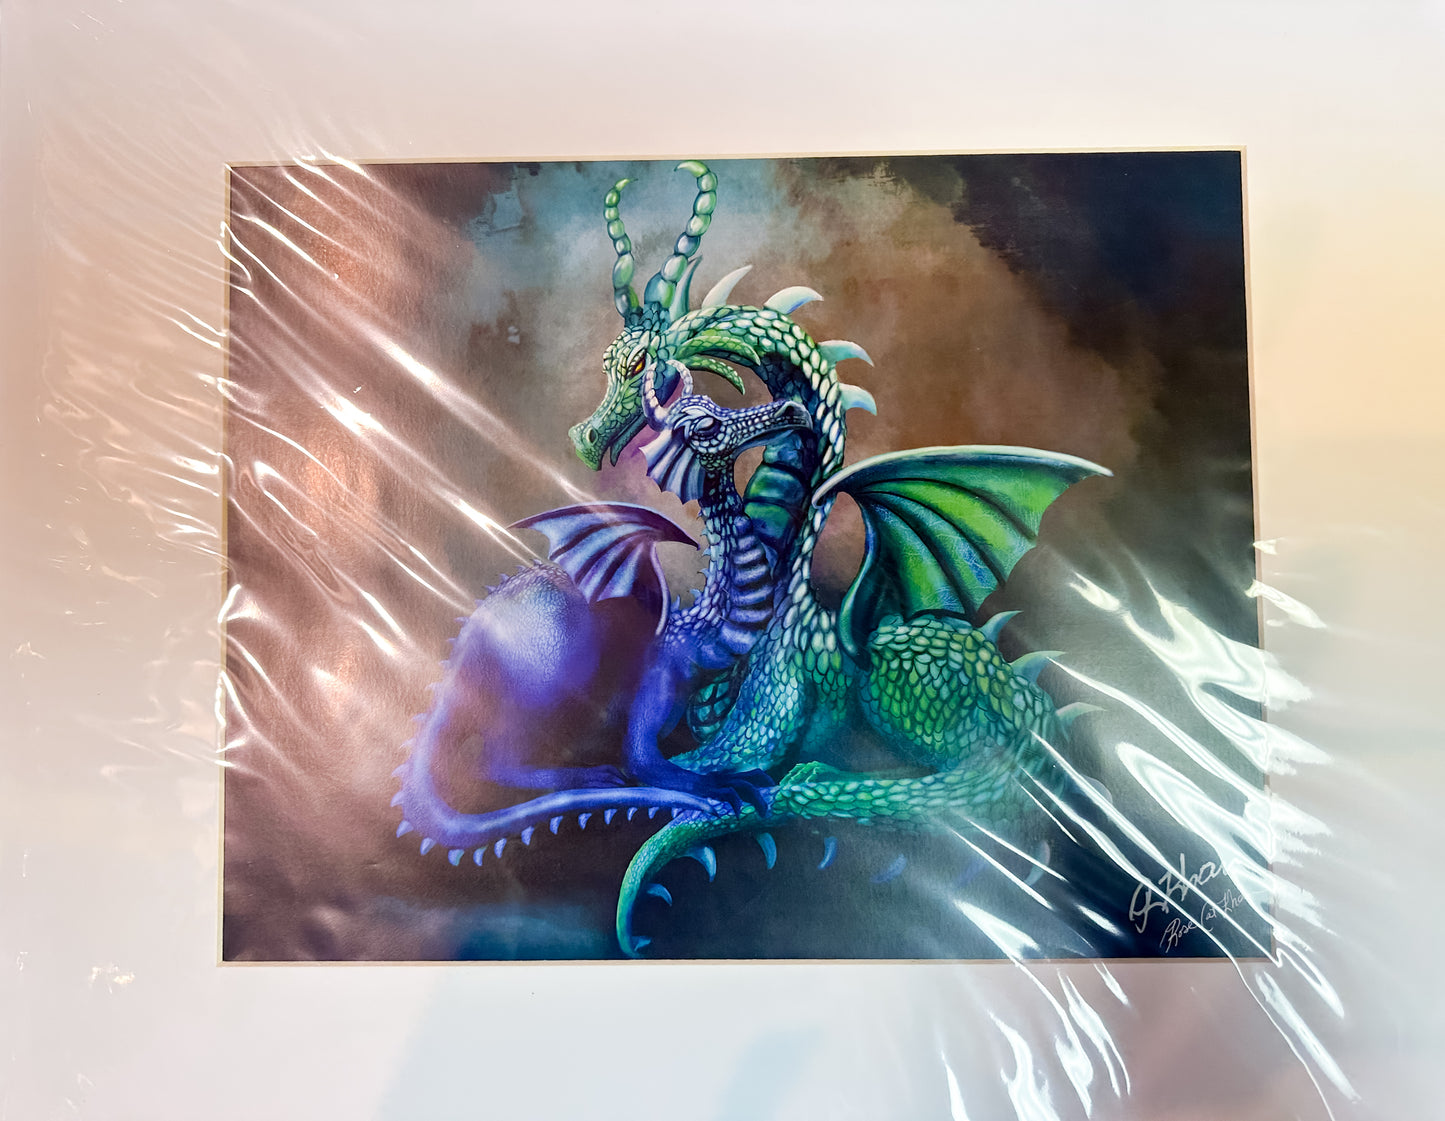 Rose Khan: "Cuddling Dragons" Matted Print - SIGNED by Artist